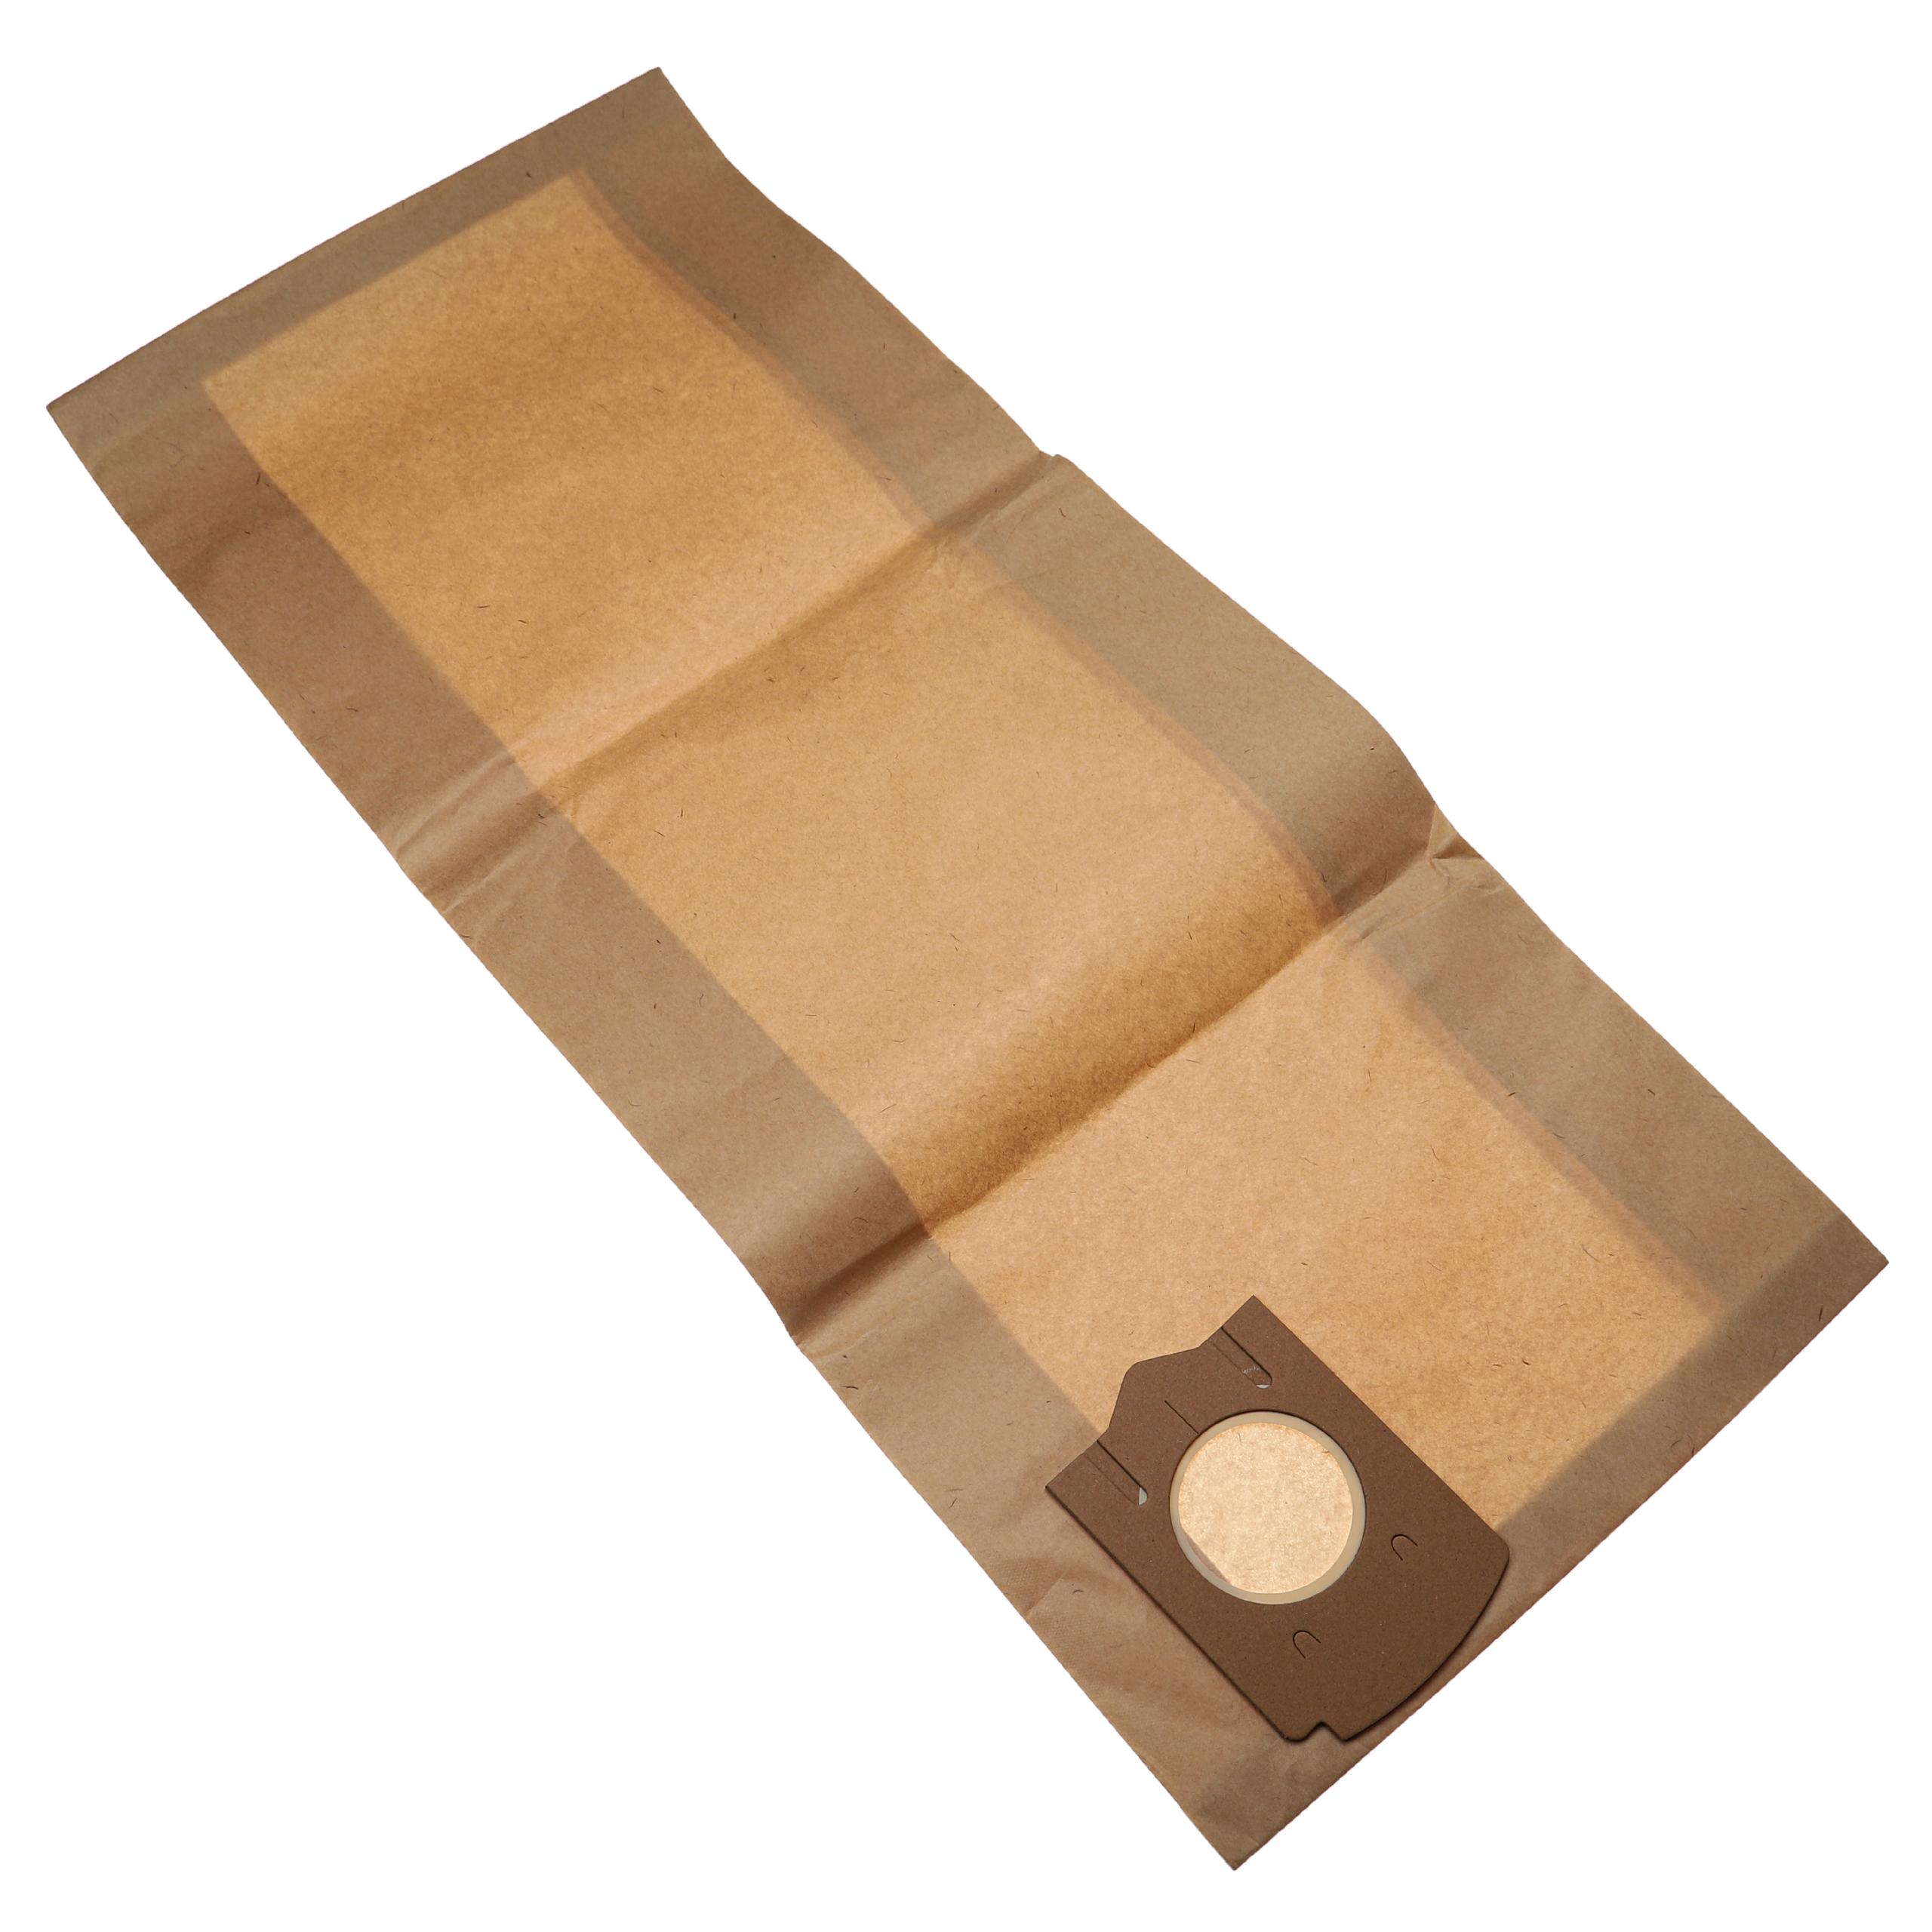 5x Vacuum Cleaner Bag replaces Bosch 2605411062, 3165140073622 for Bosch - paper